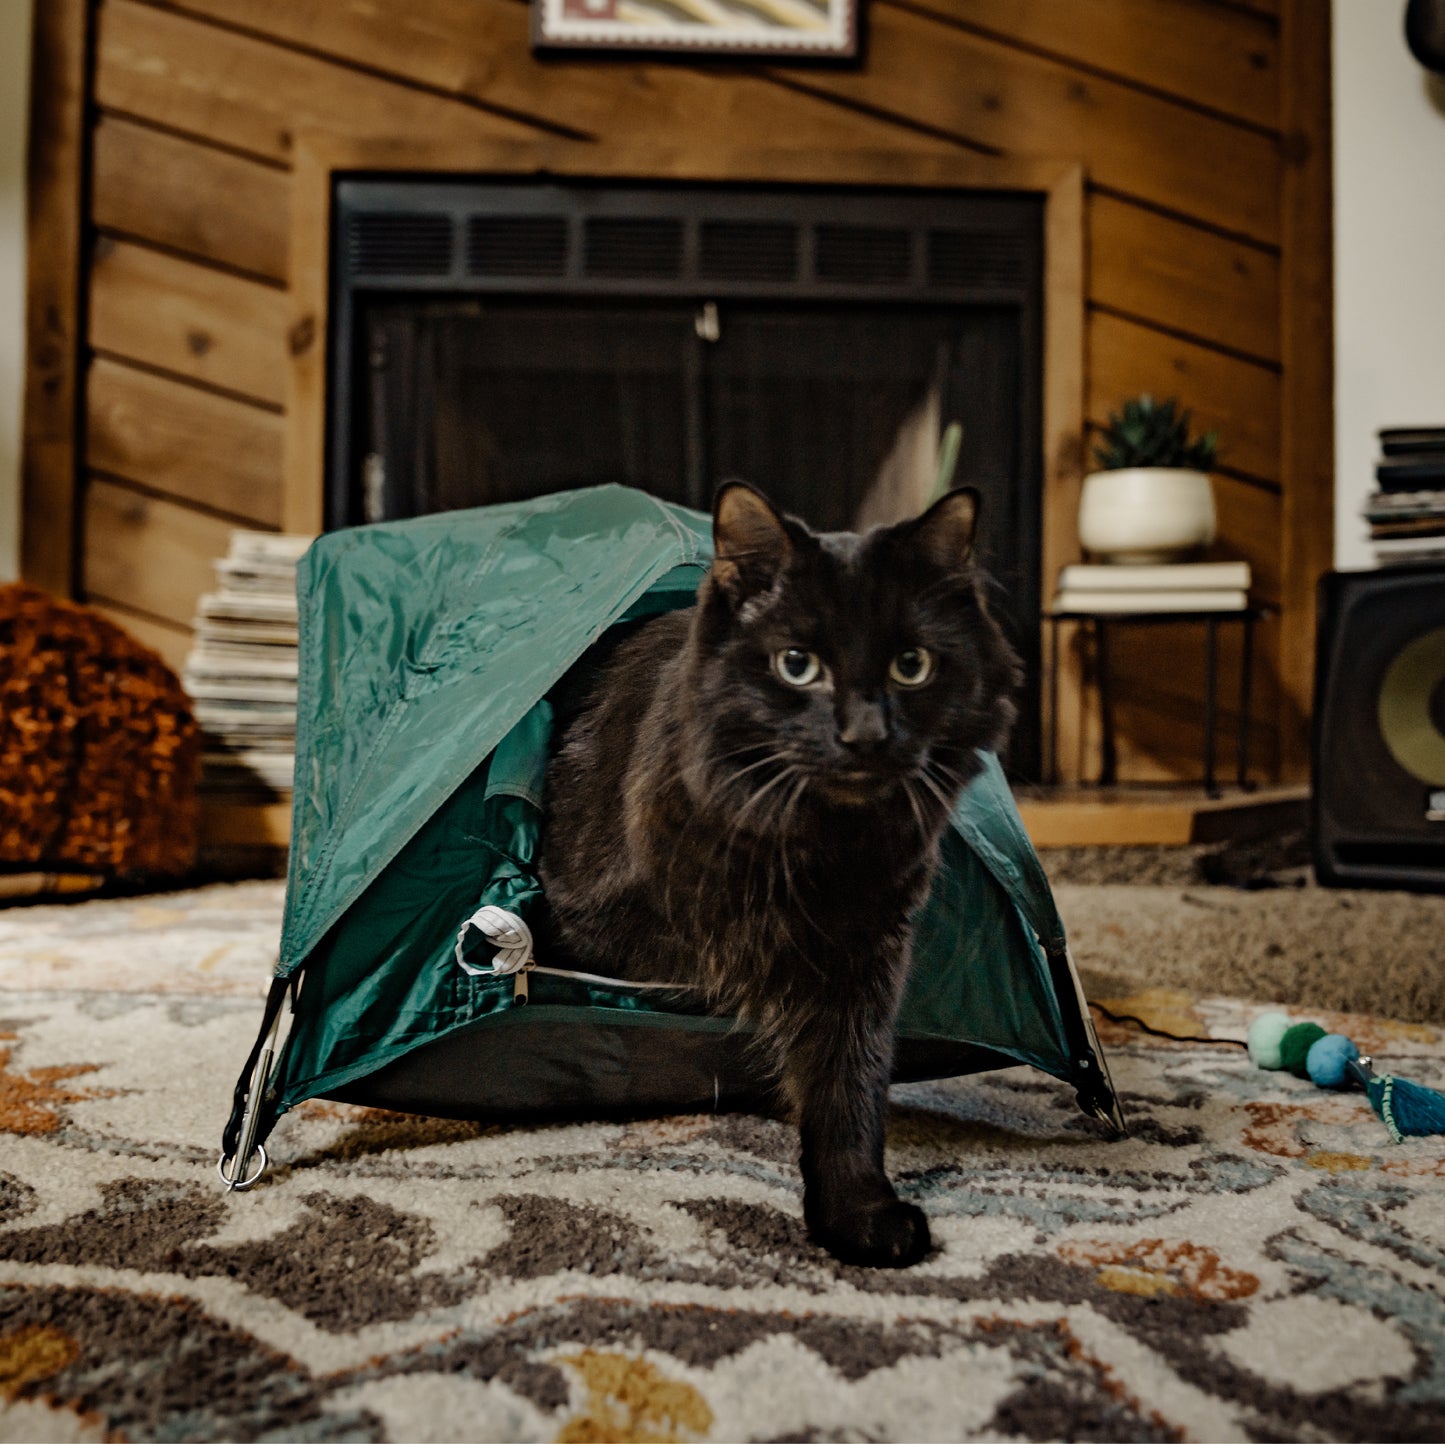 Green tiny tent in a living room with a black cat climbing out of the tent.